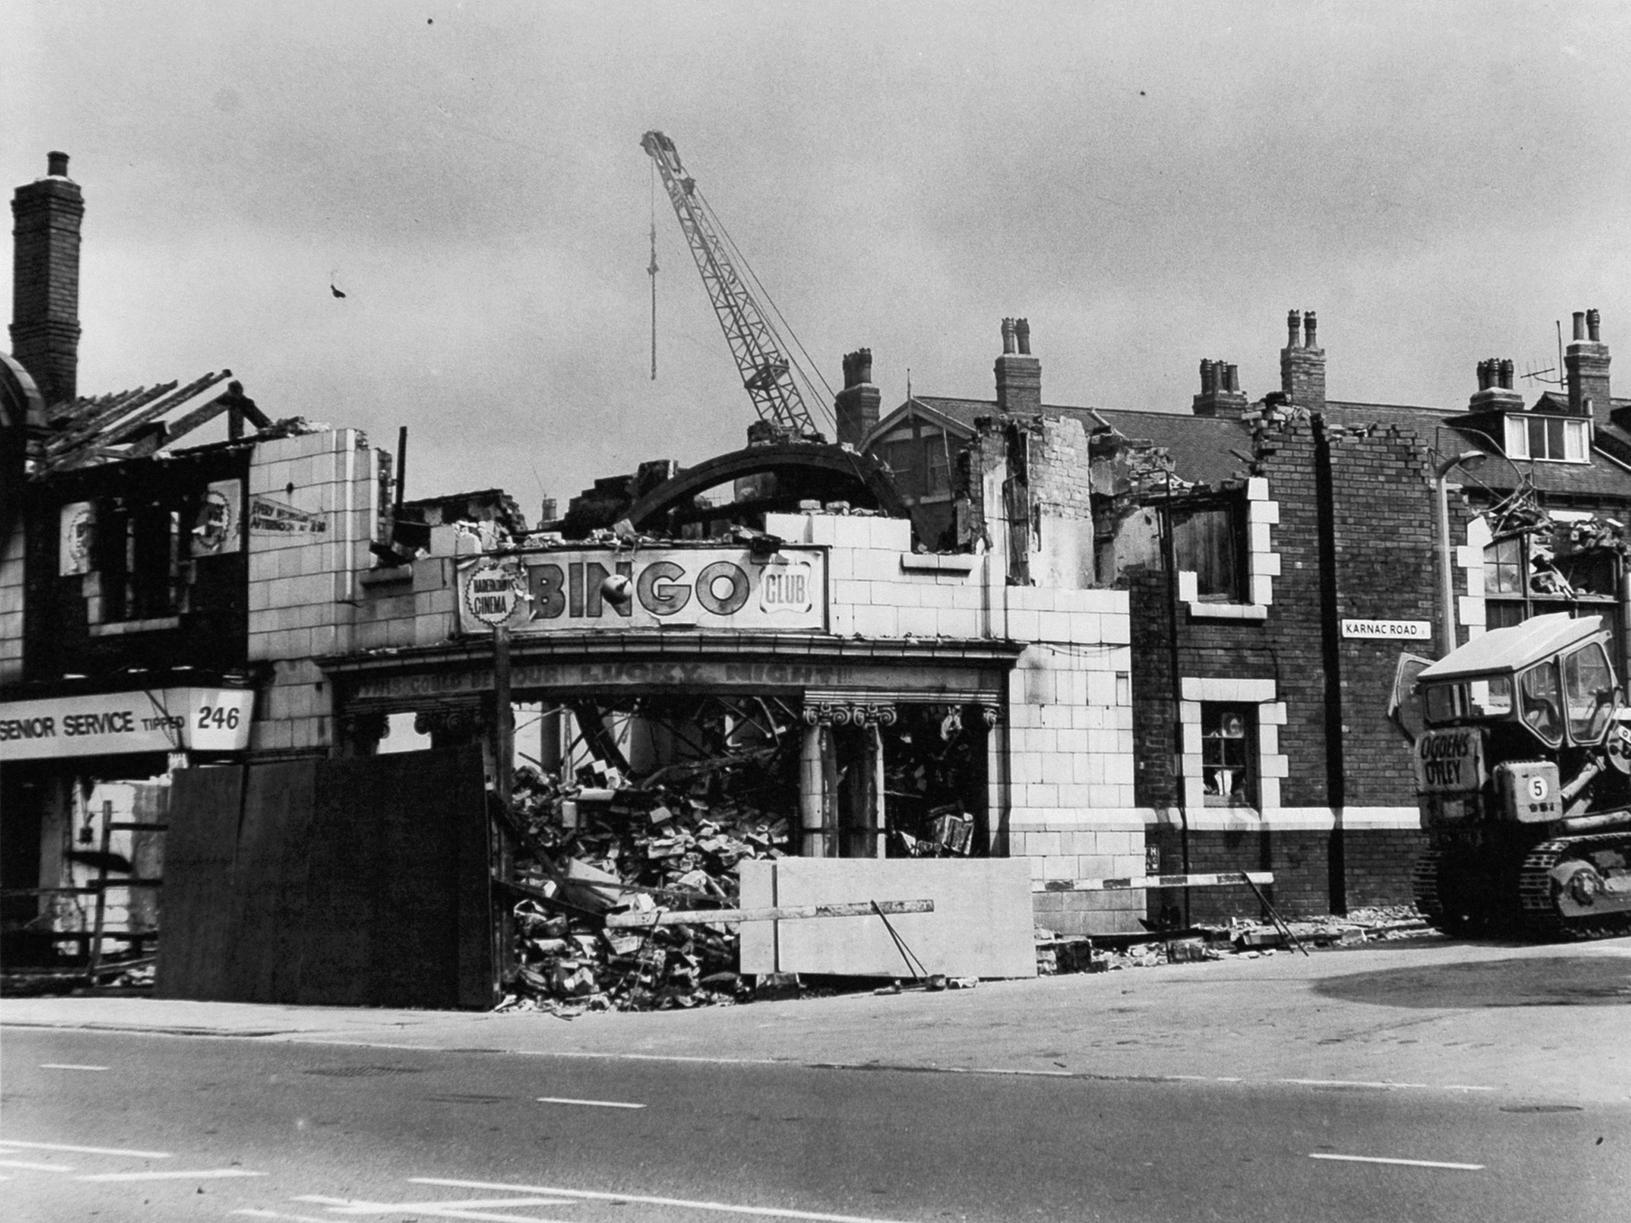 This cinema opened in December 1912 and closed in October 1963. The premises were then used for bingo but demolished in July 1968 to make way for shops.